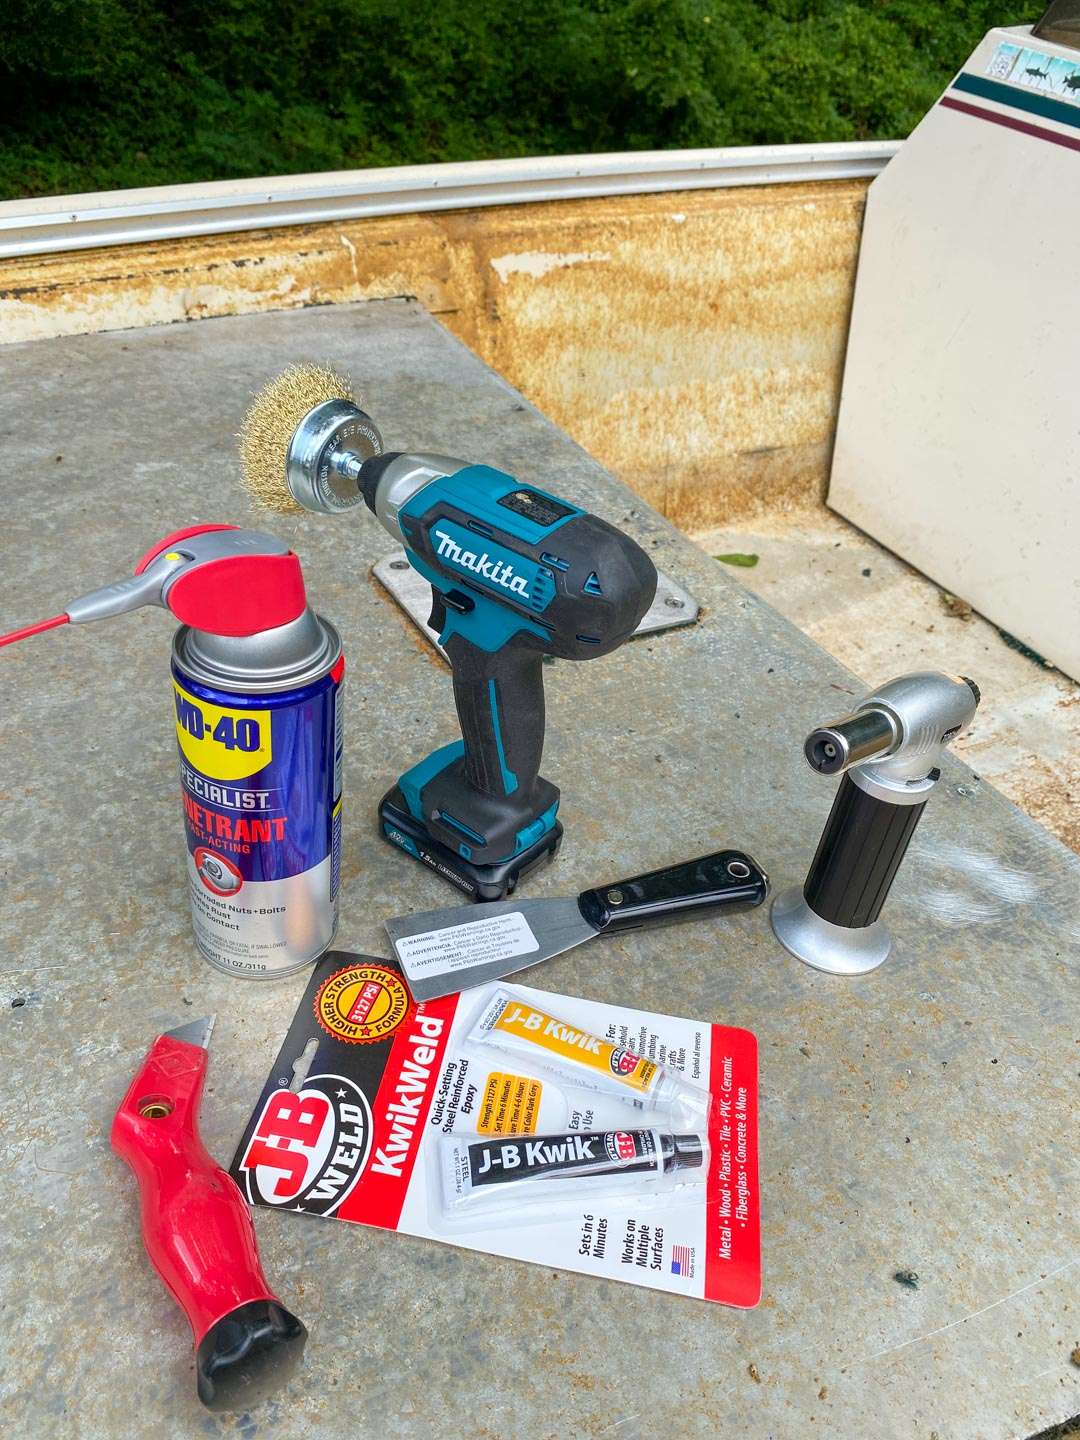 Here are a few items I grabbed from Home Depot. The wire brush for the drill proved invaluable. I used the JB weld to fill a small crack in the floor. The putty knife was used for scraping off glue and the torch was to burn off edges of carpet that I could not remove any other way. The WD 40 helped me loosen screws to eventually remove the seats.